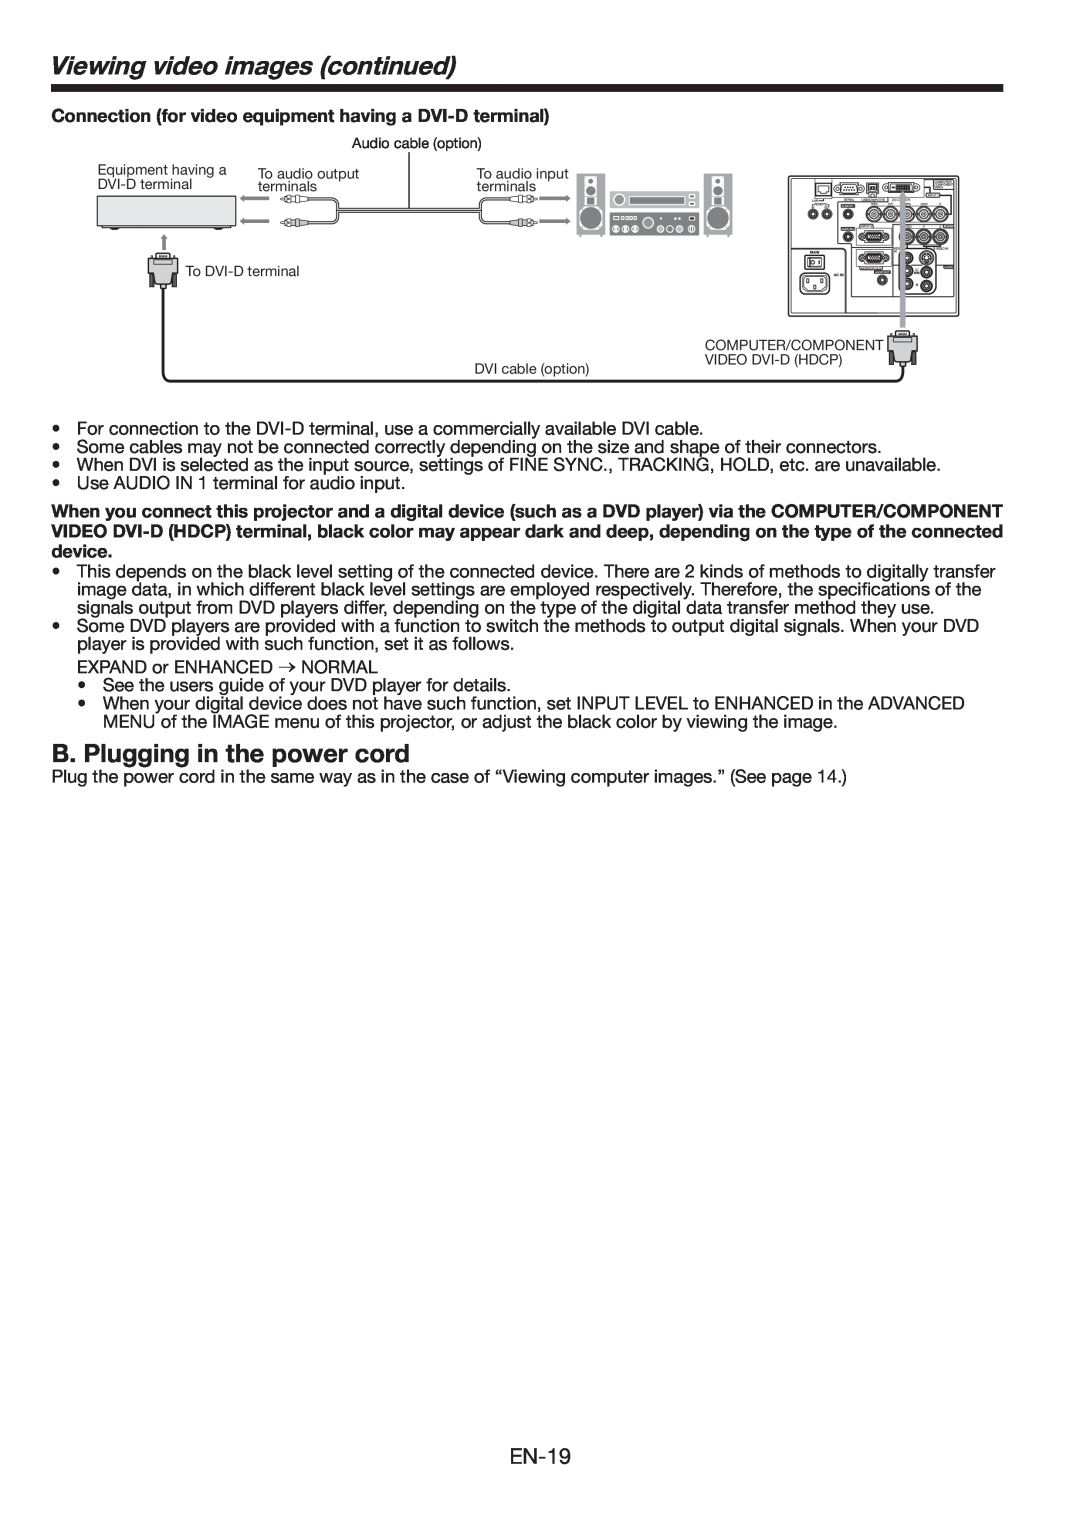 Mitsubishi Electronics FL6900U user manual B. Plugging in the power cord, Viewing video images continued, EN-19 